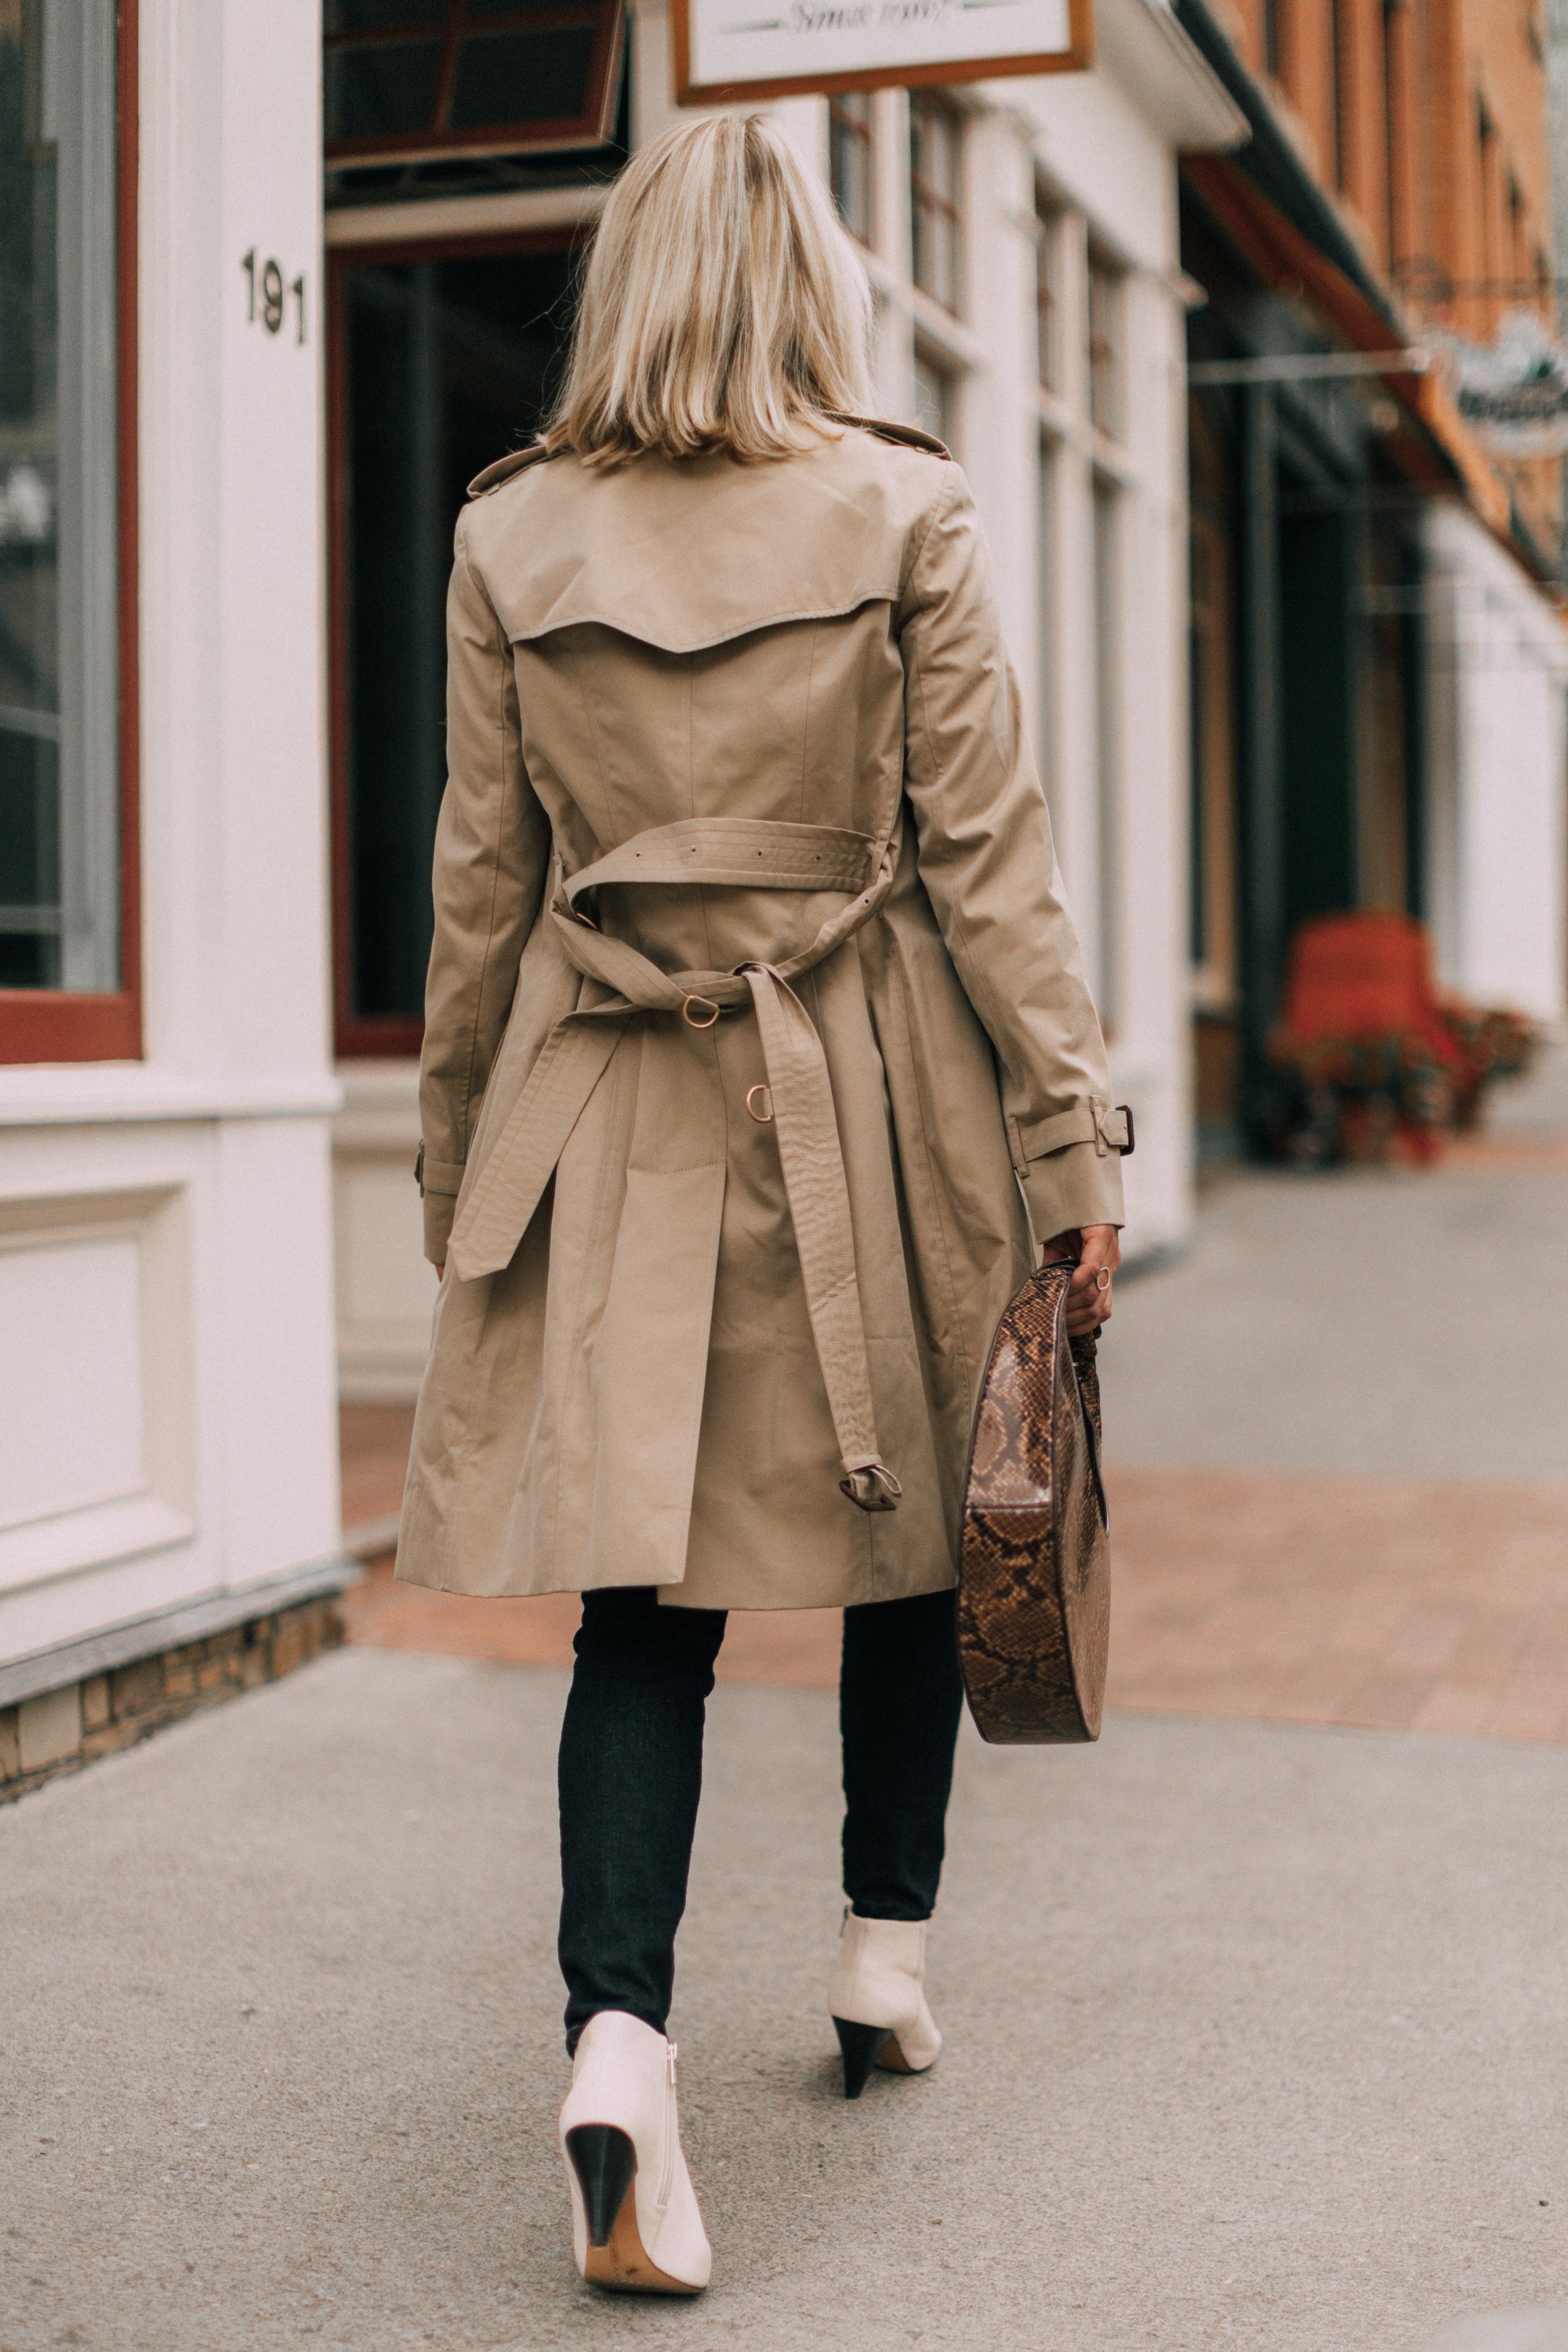 Burberry tan Keningston trench coat on on fashoin blogger Erin Busbee of Busbee Style in Telluride, Colorado